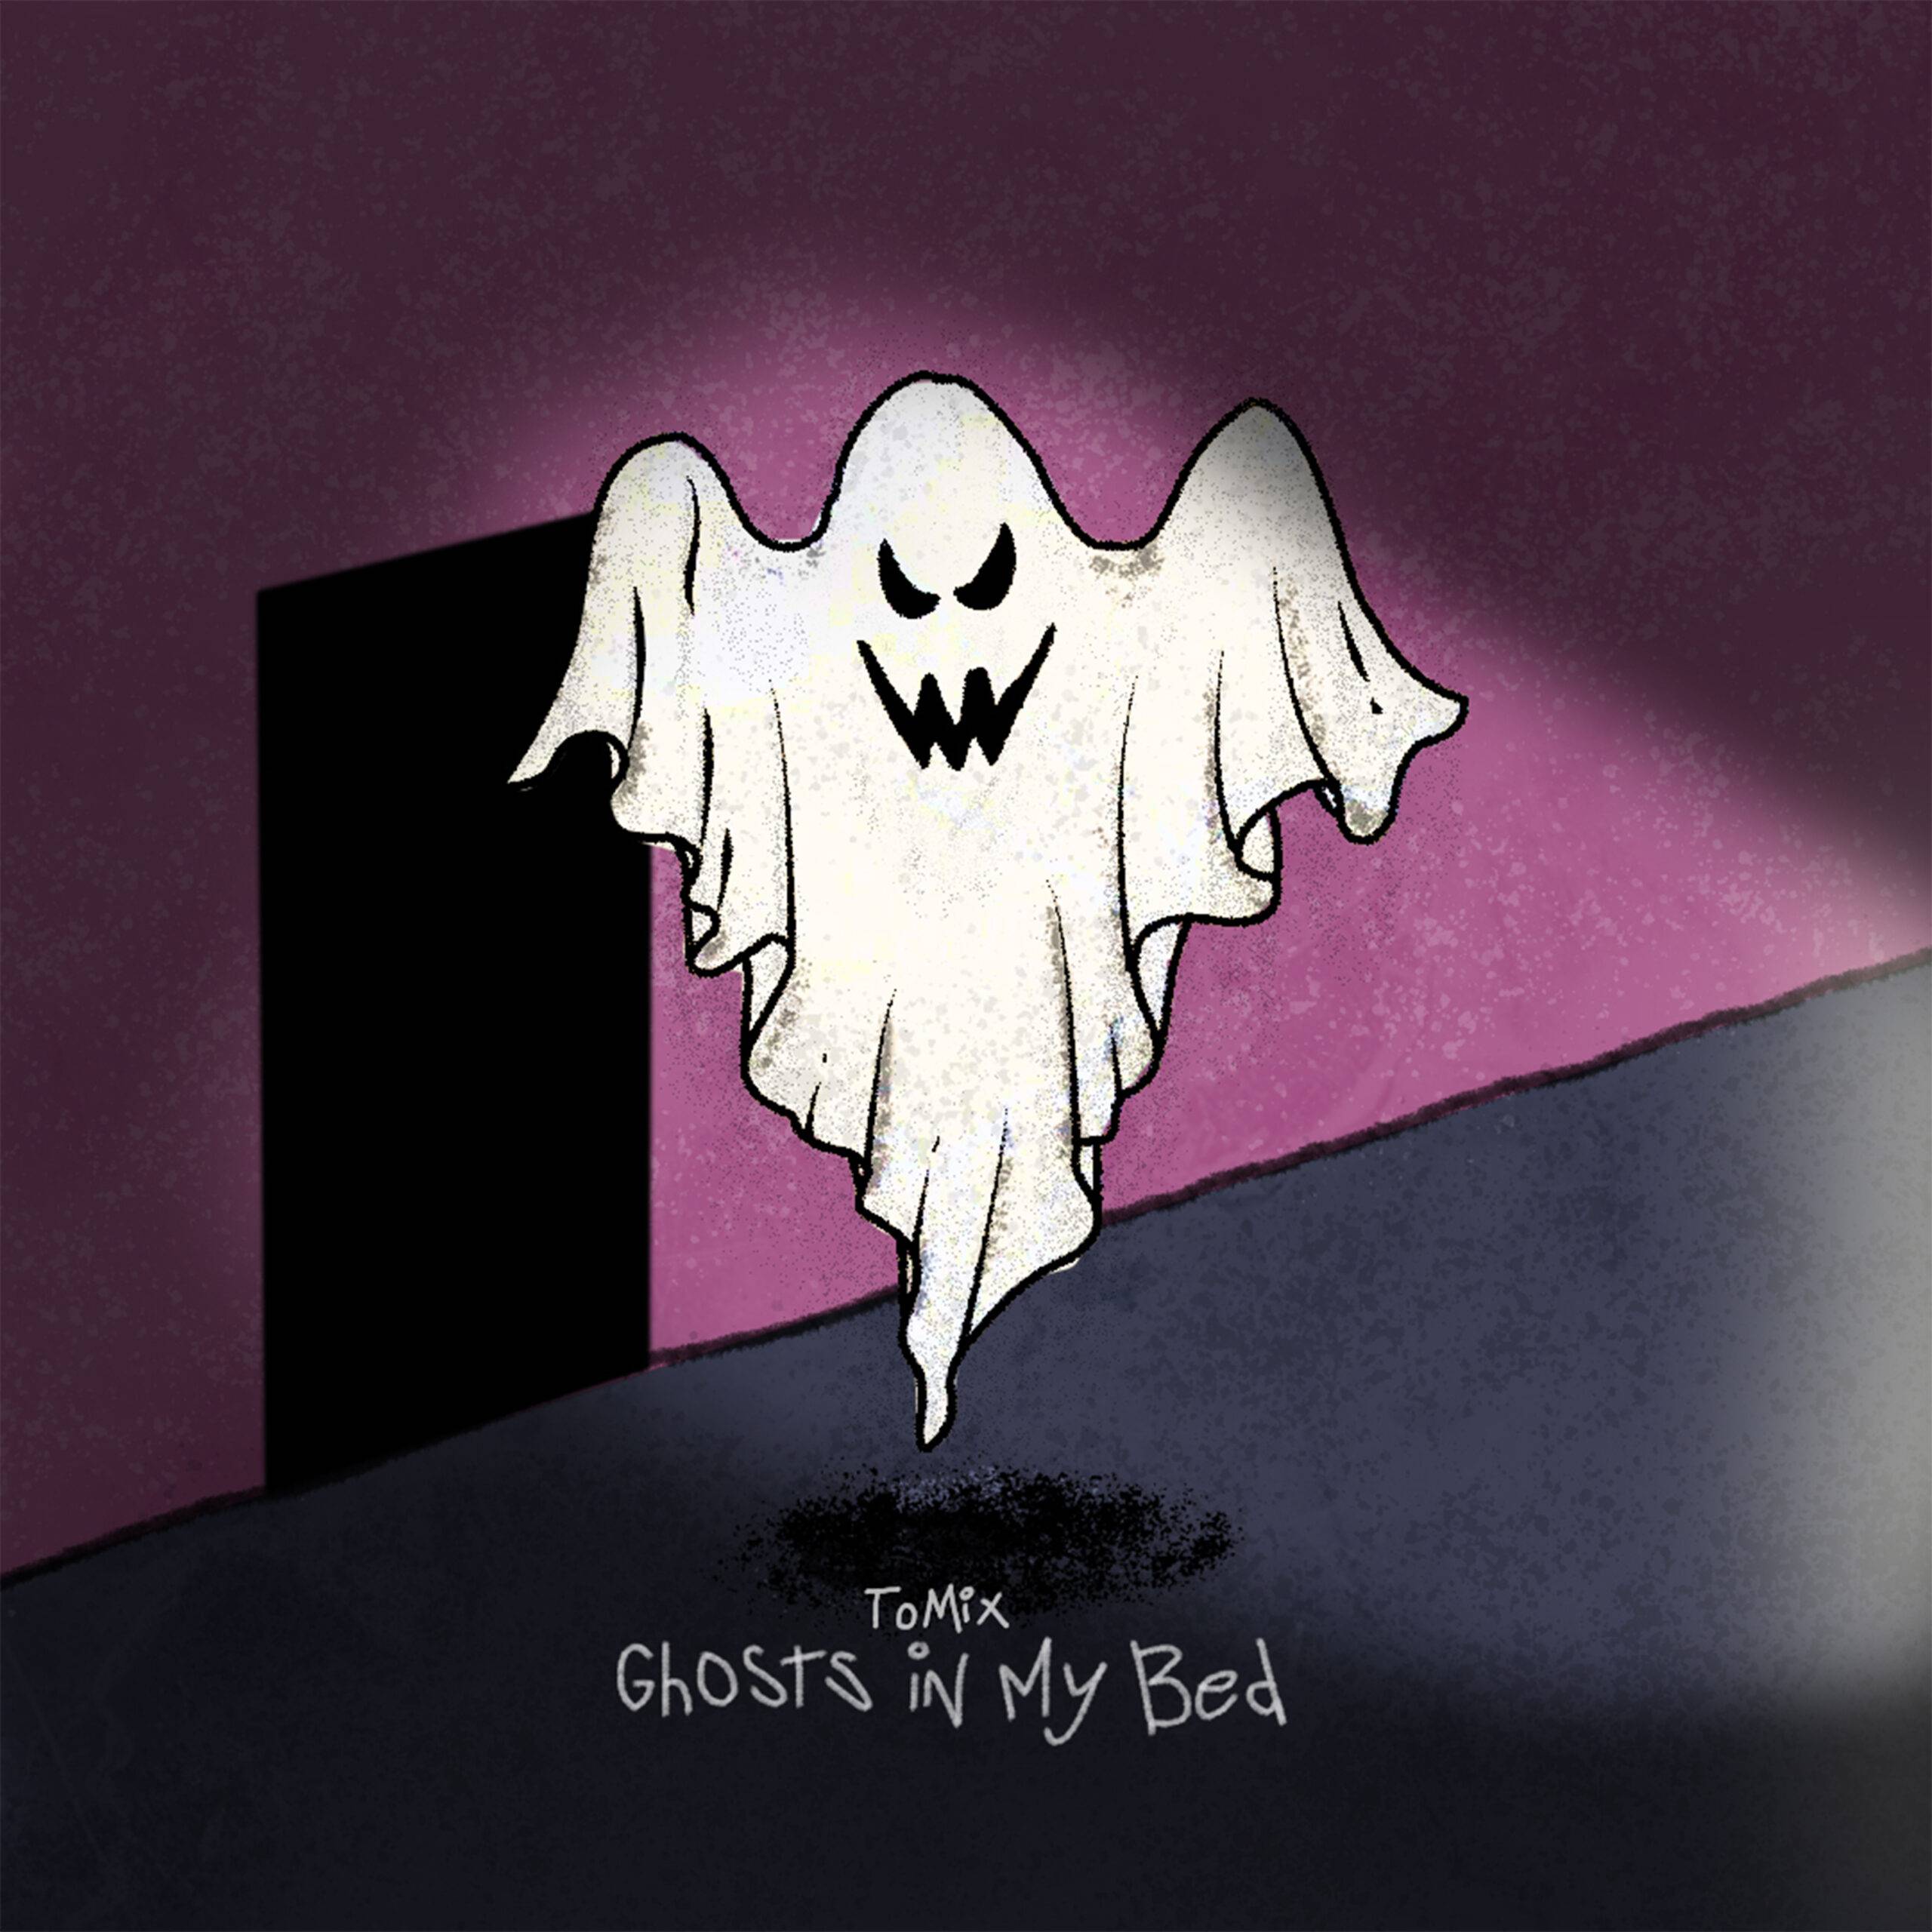 Artwork for 'Ghosts In My Bed' by ToMix. features a ghost inside a purple-pink house, outside of an empty bedroom.